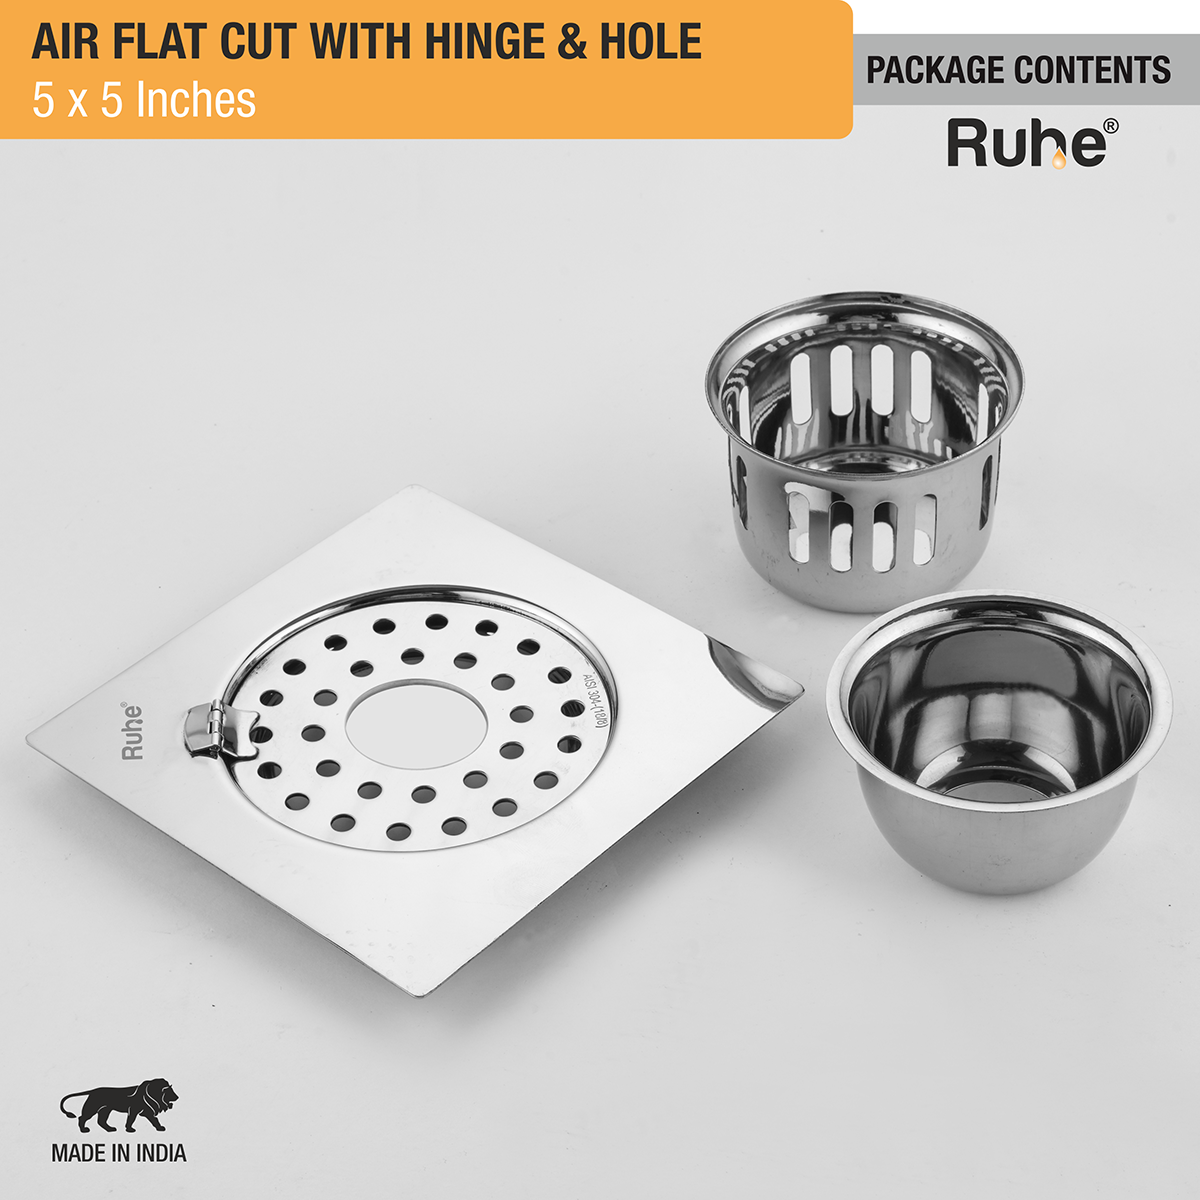 Air Square Flat Cut Floor Drain (5 x 5 Inches) with Hinge, Hole and Cockroach Trap (304 Grade) package content